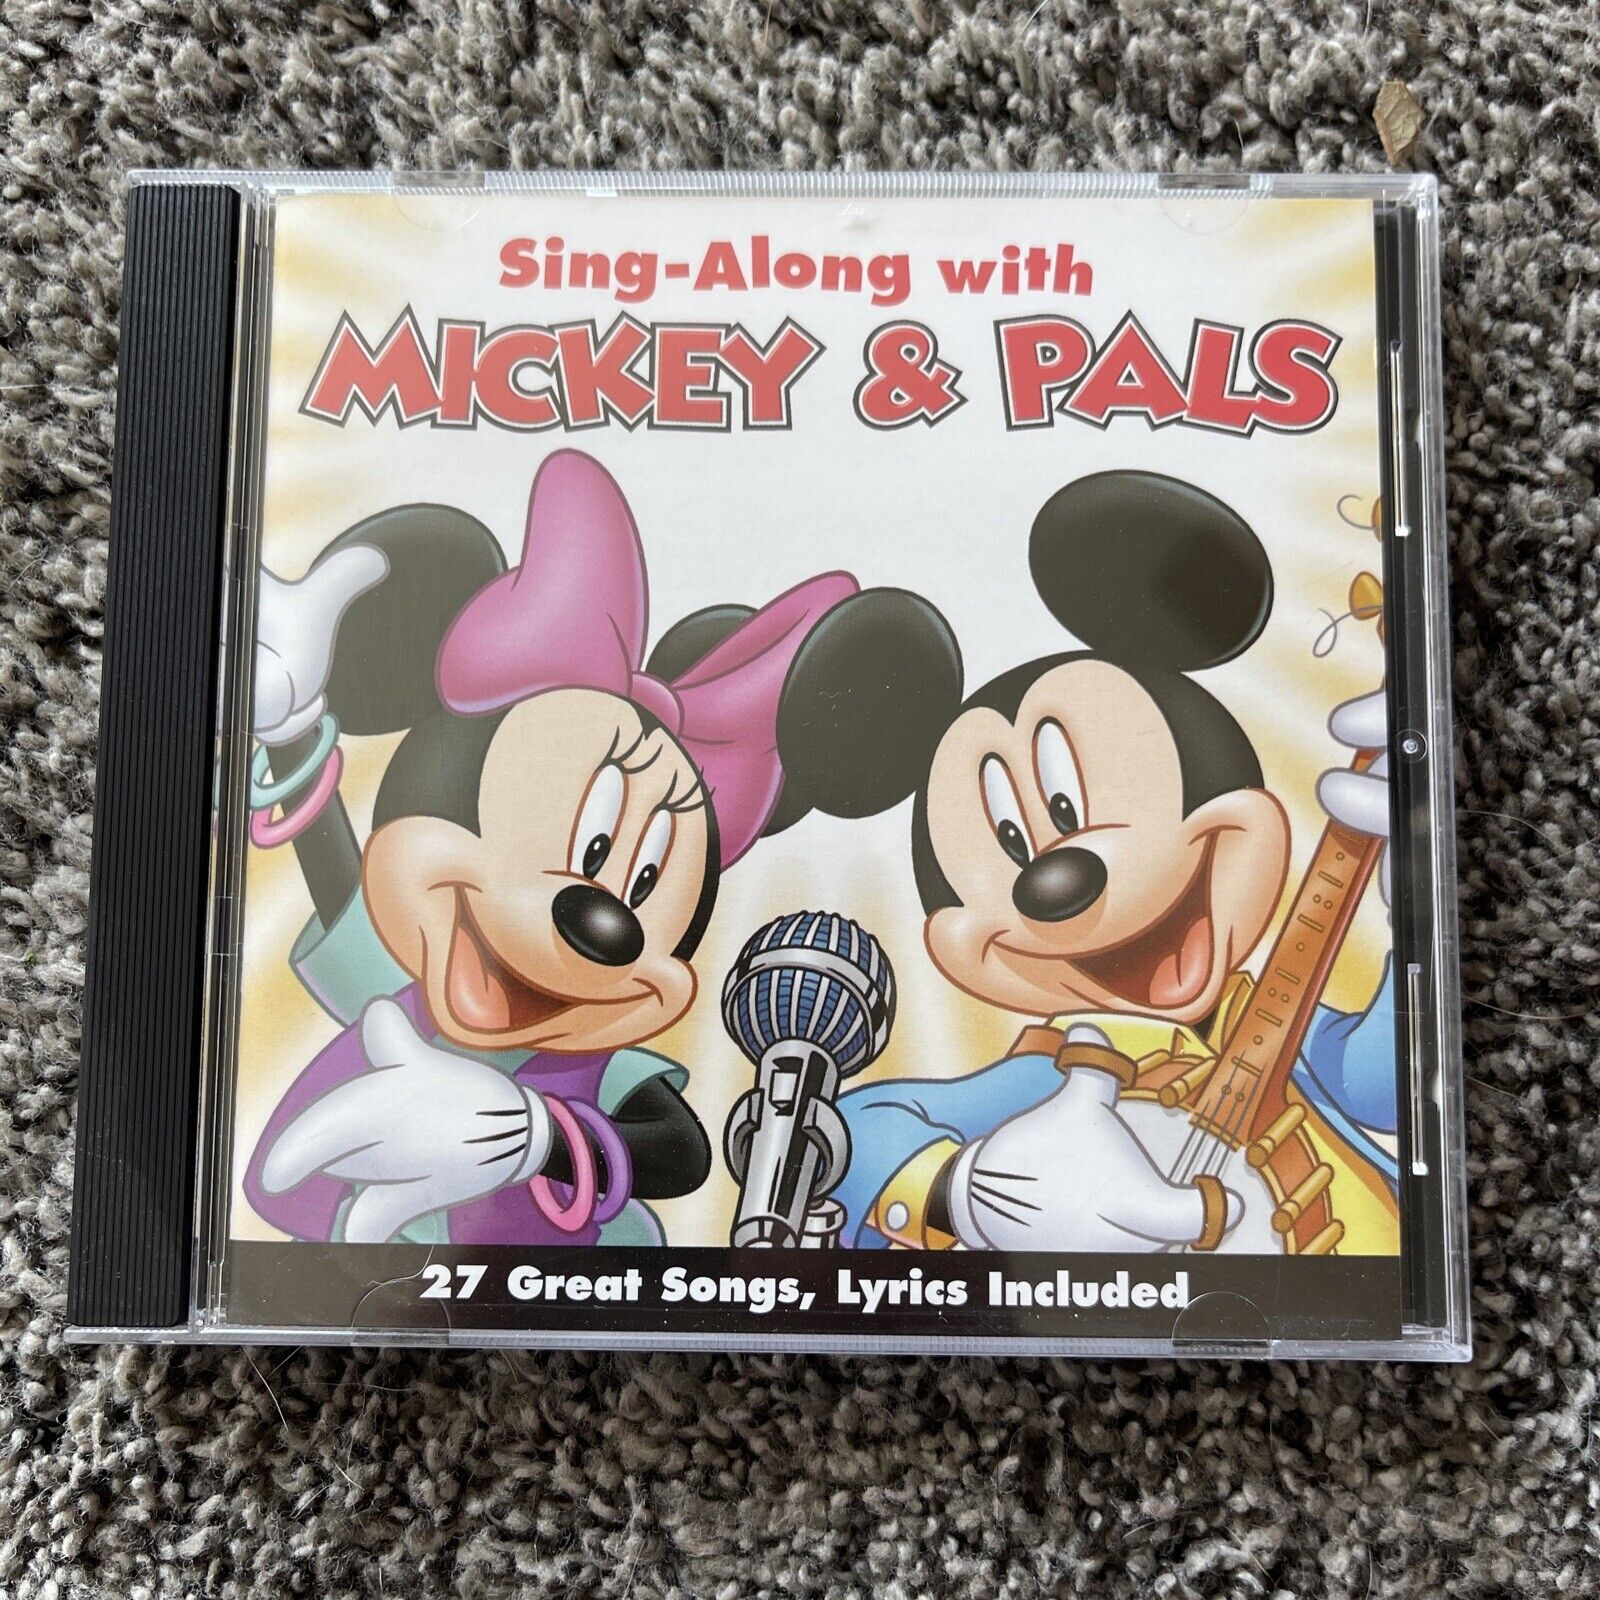 Sing-Along With Mickey & Pals by Disney (CD, May-2002, Walt Disney) See Pictures